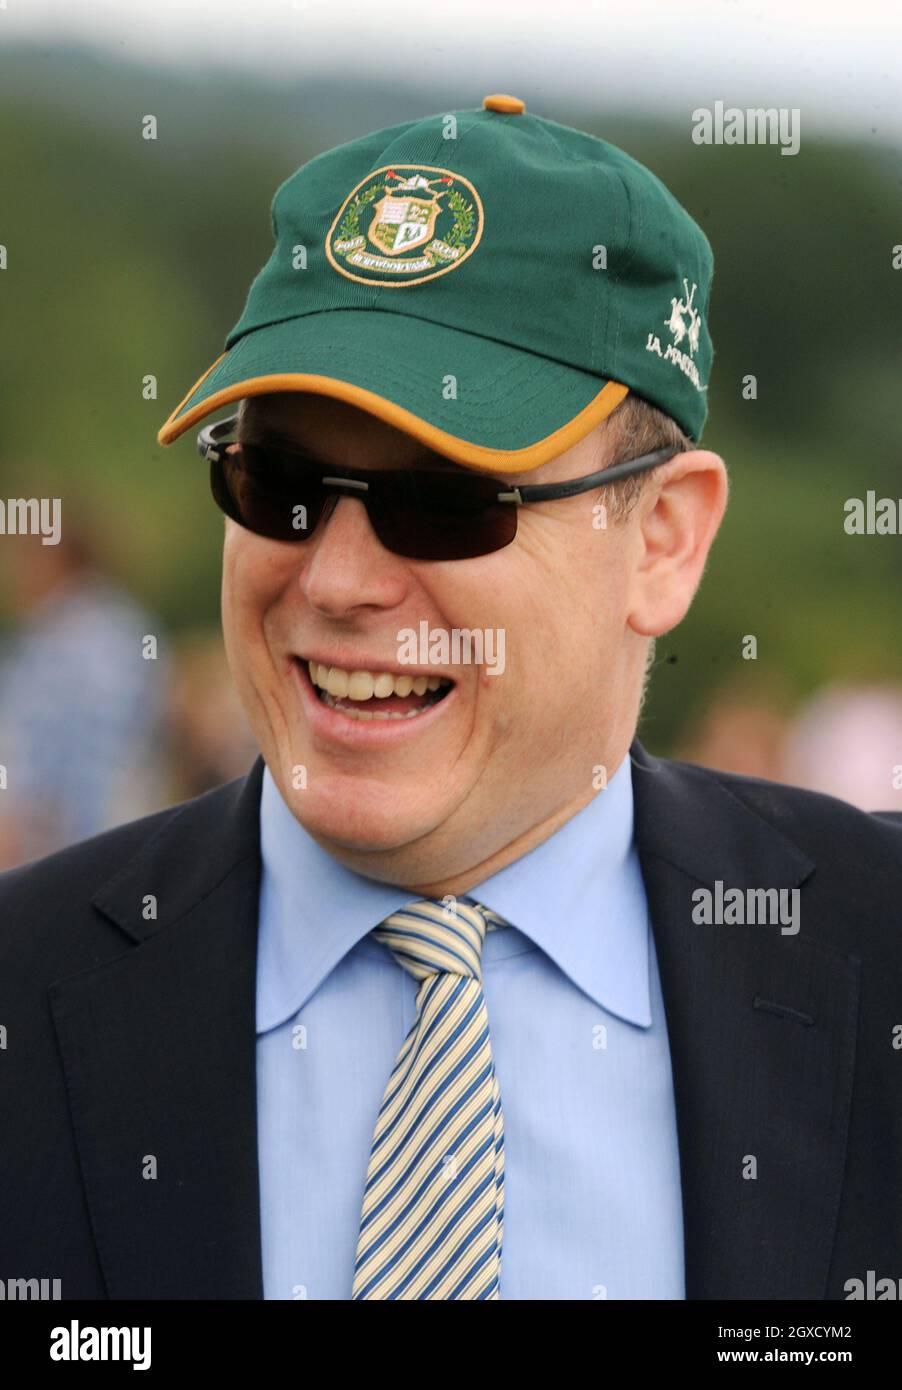 Prince Albert of Monaco attends the Asprey World Class Cup at Hurtwood Park Polo Club in Surrey on July 17, 2010. Stock Photo